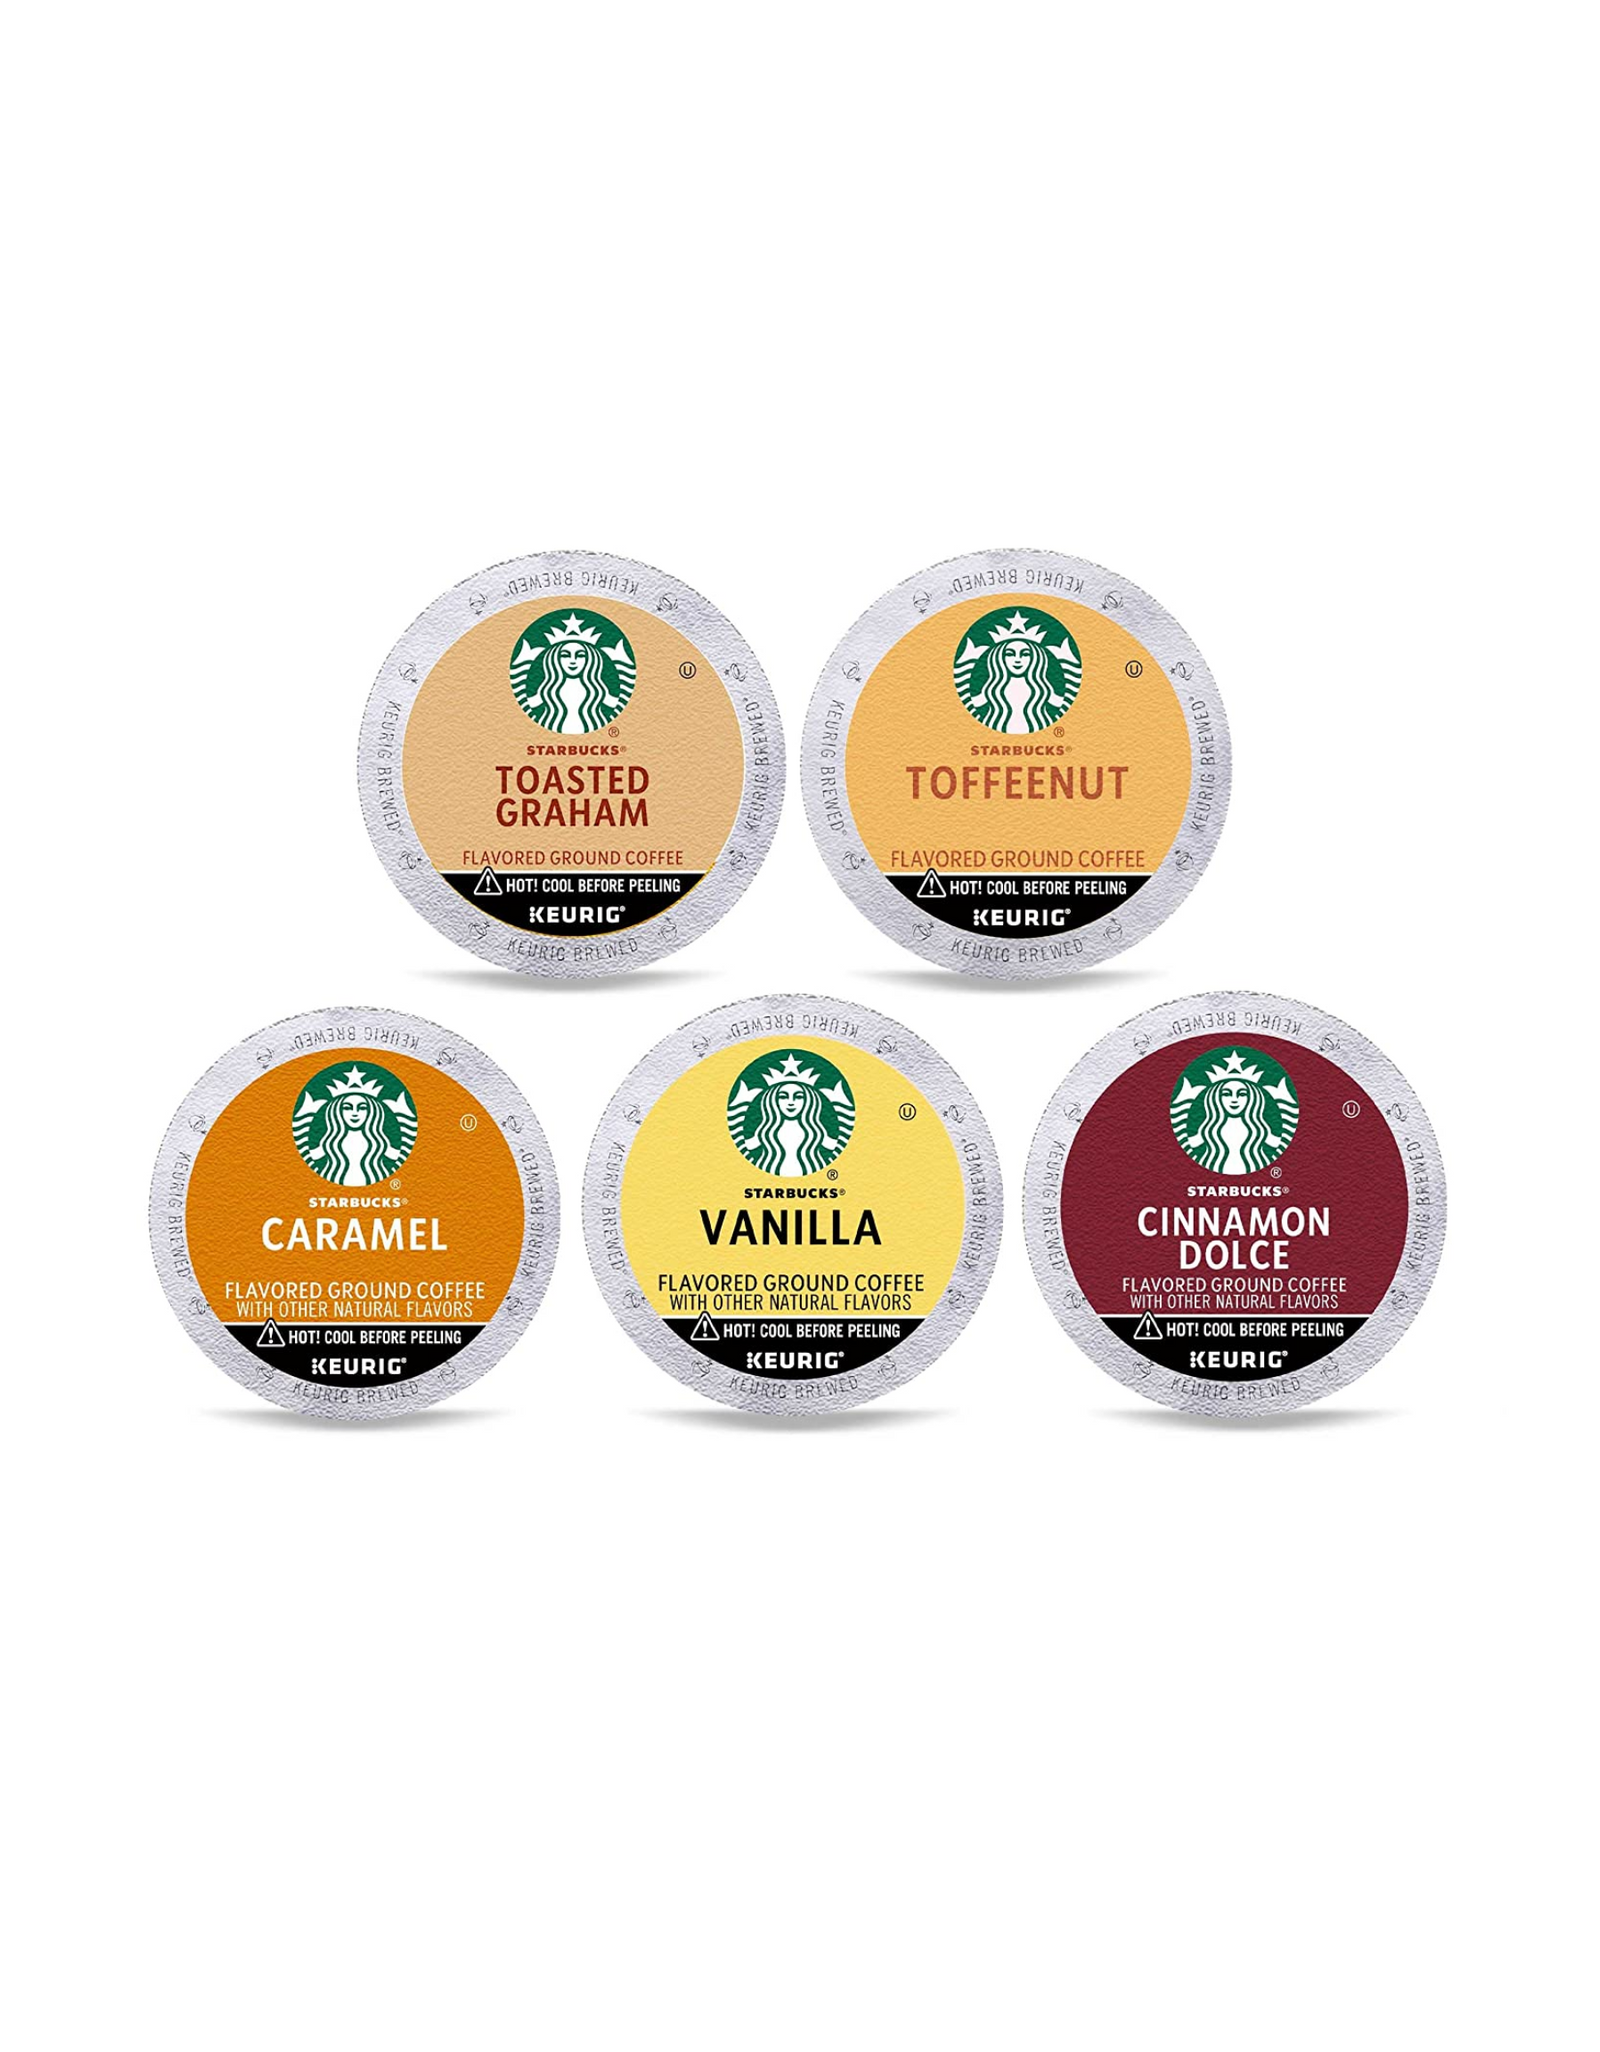 Starbucks K-Cup Coffee Pods, Flavored Coffee Variety Pack, 100% Arabica, 1 box (40 pods)